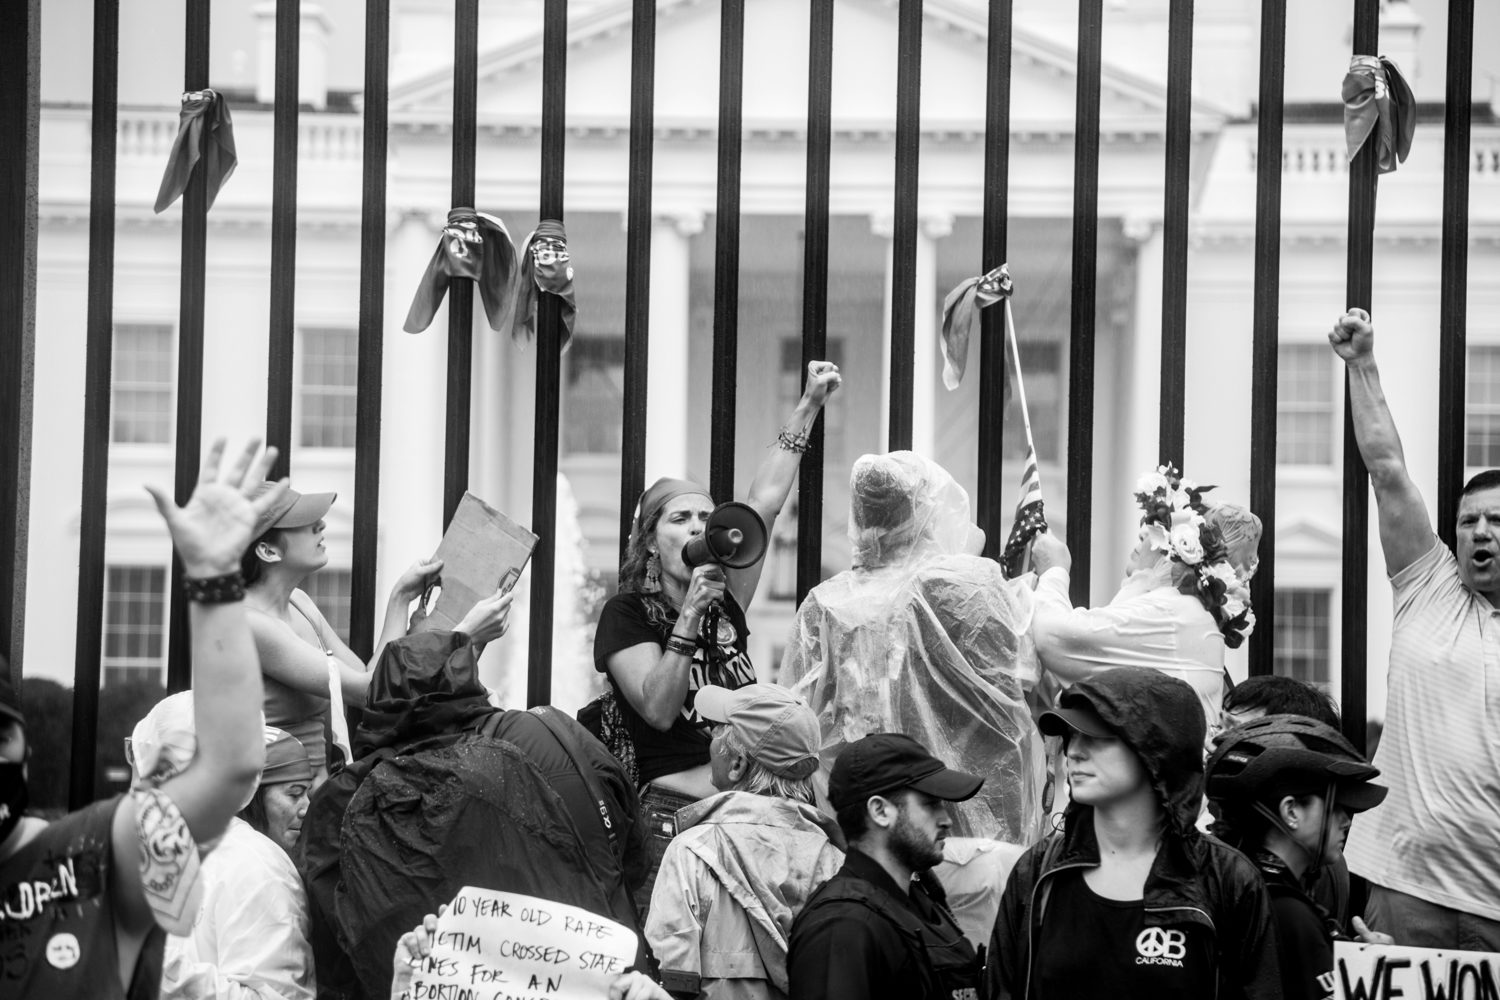 Risking arrest, protestors stood on the fence before the White House and let their anger be heard. Secret Service and Park Police patrolled the protest but let the protestors have their time and space to exercise their First Amendment rights.